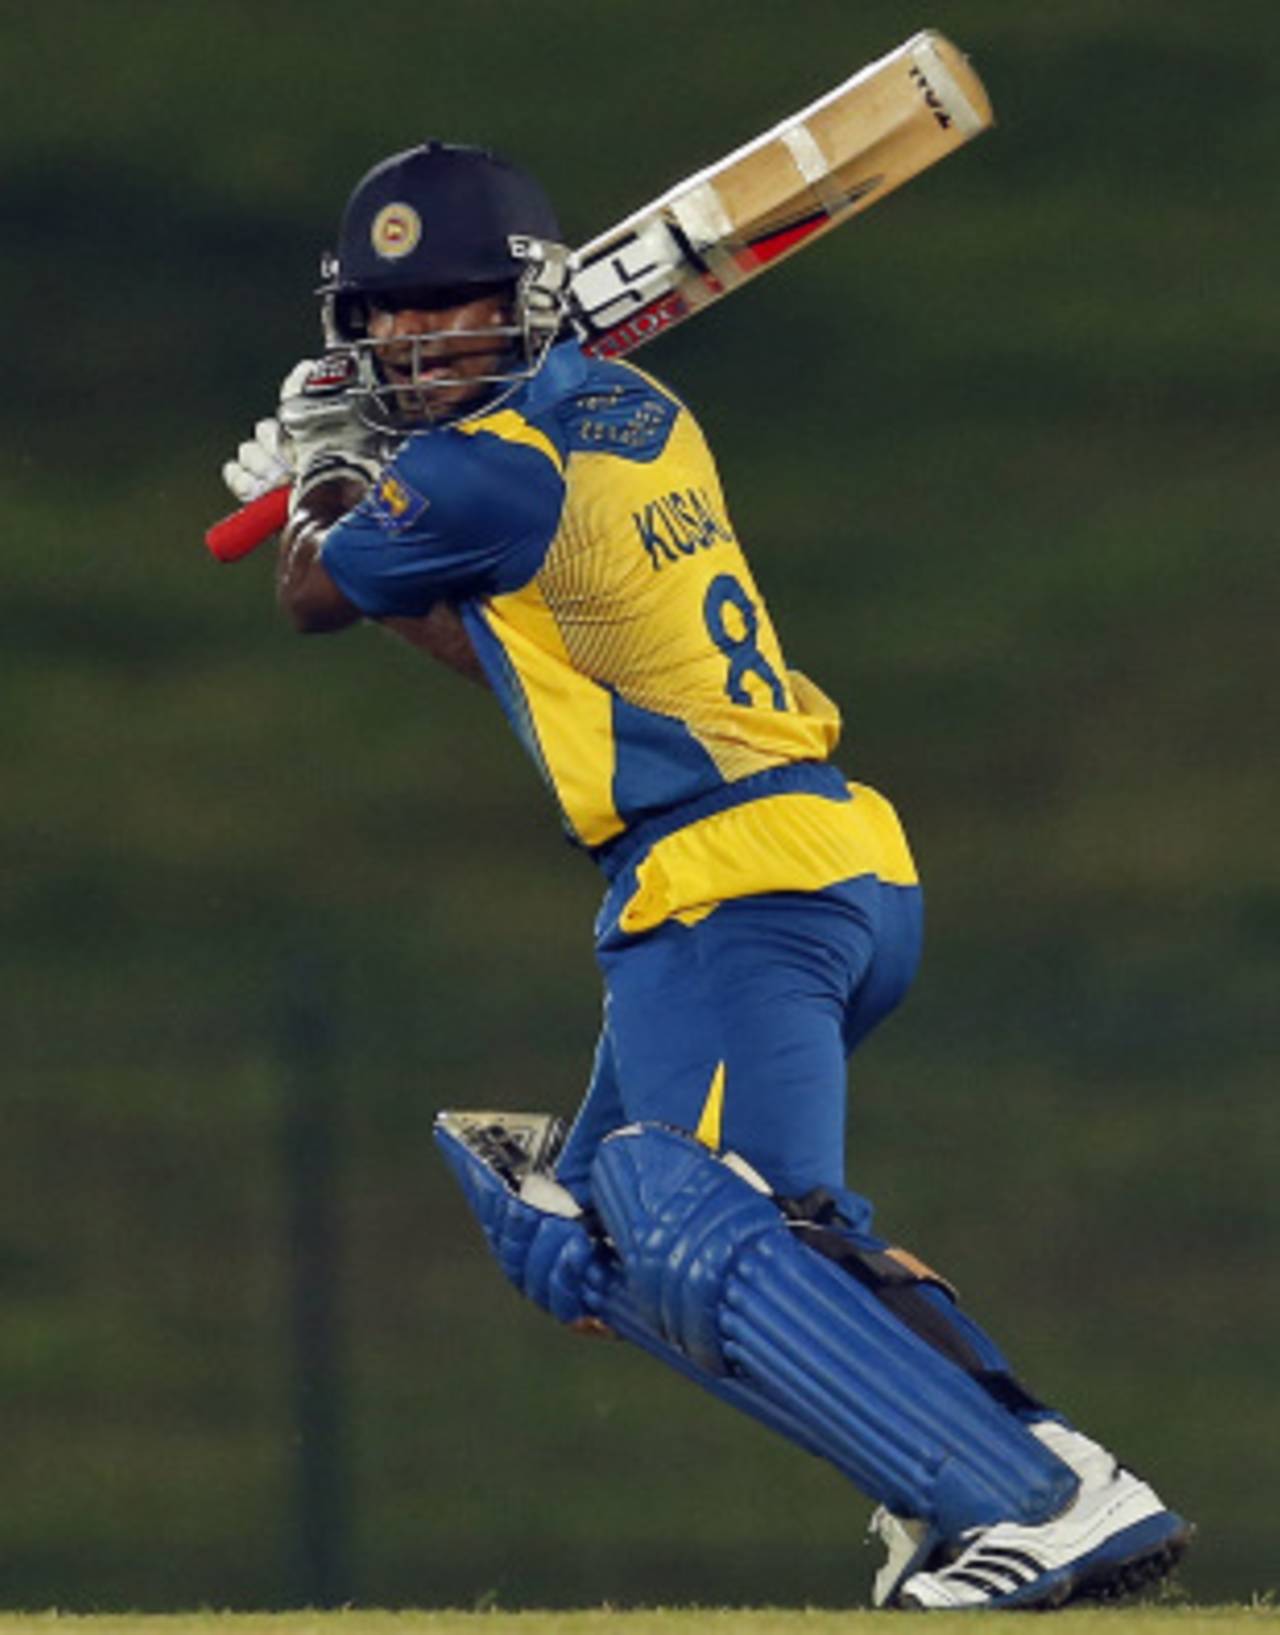 Kusal Janith Perera smashed 14 sixes in his 275-ball 336 - the first triple-century by a Sri Lankan in a domestic first-class match&nbsp;&nbsp;&bull;&nbsp;&nbsp;Associated Press